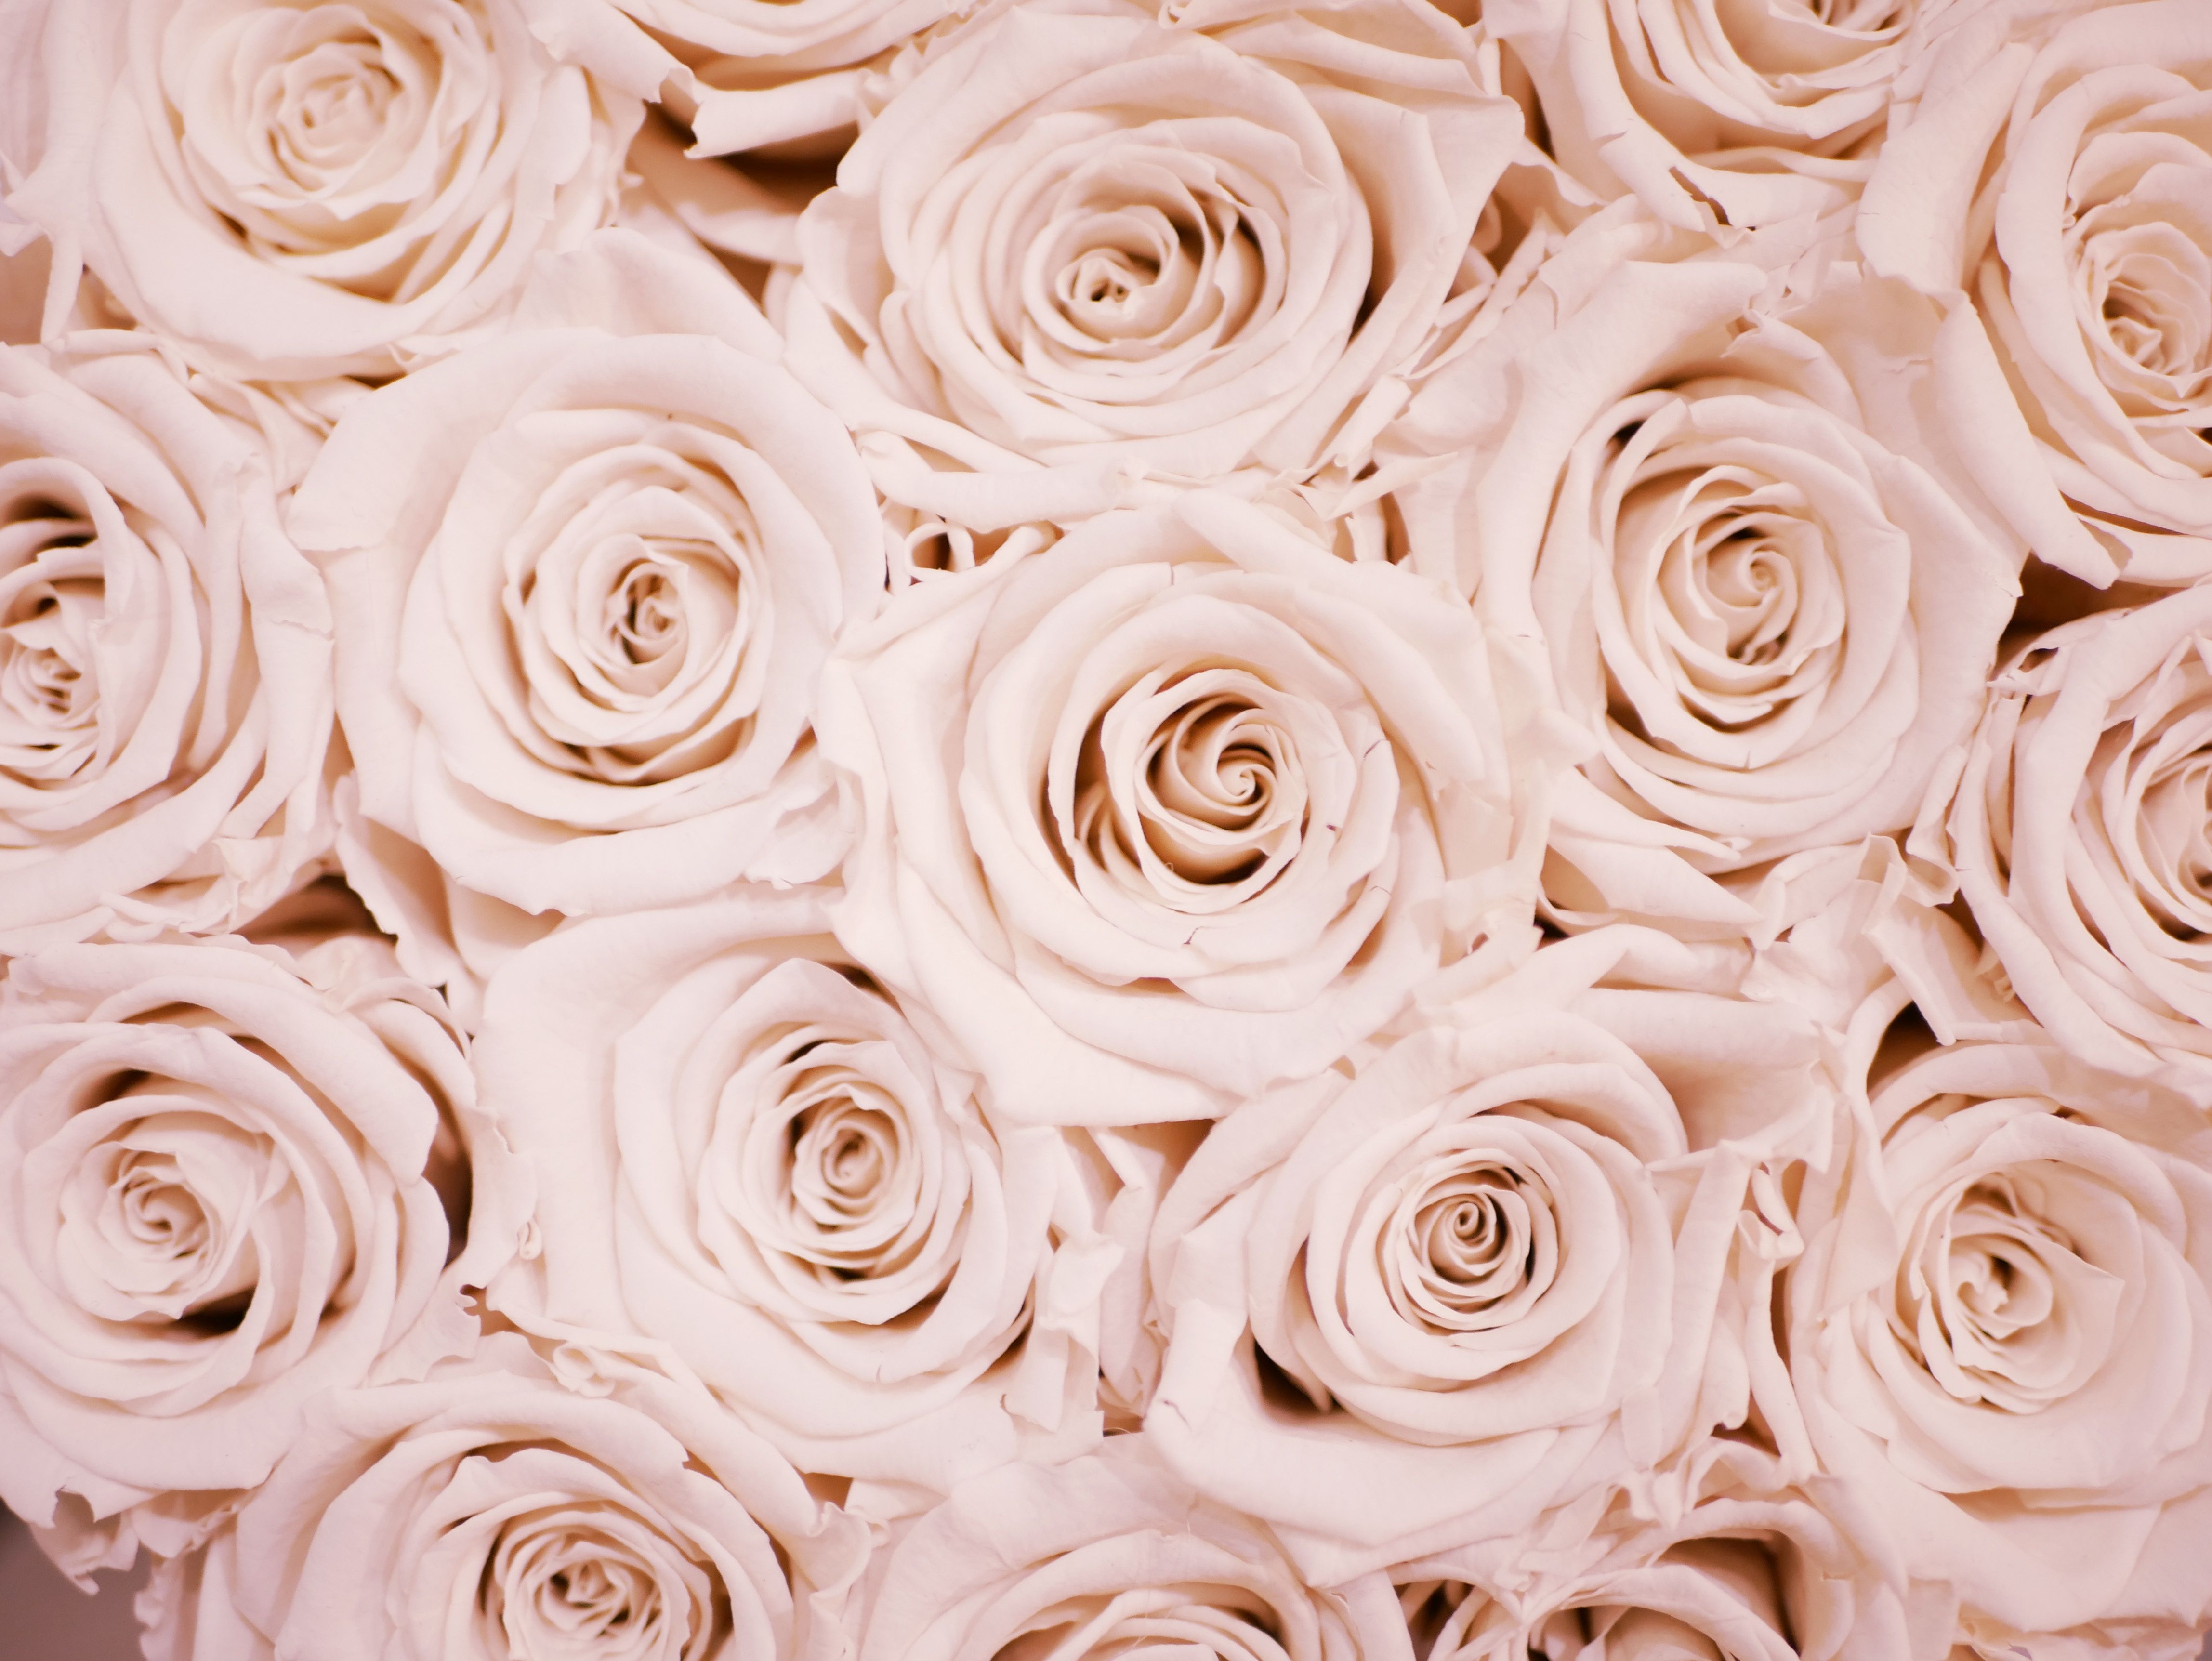 4592x3448 Creative Commons image, round, wallpaper, pink, beauty, gentle, petal, flower, bunch, many, flora, bloom, life, blush pink, soft, minimal, rose, swirl Gallery HD Wallpaper